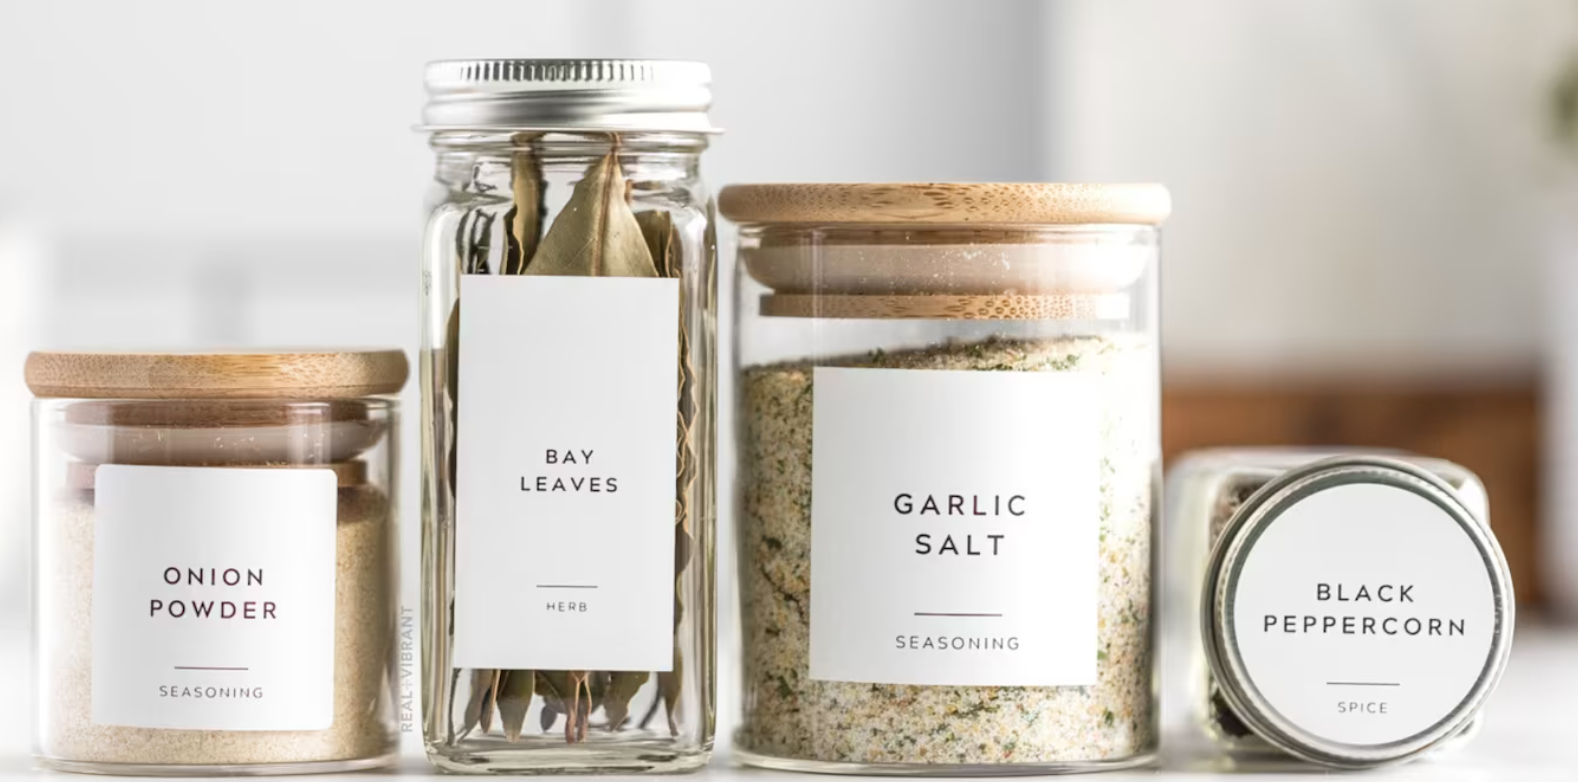 The variation of printed labels on different kinds of spice jars